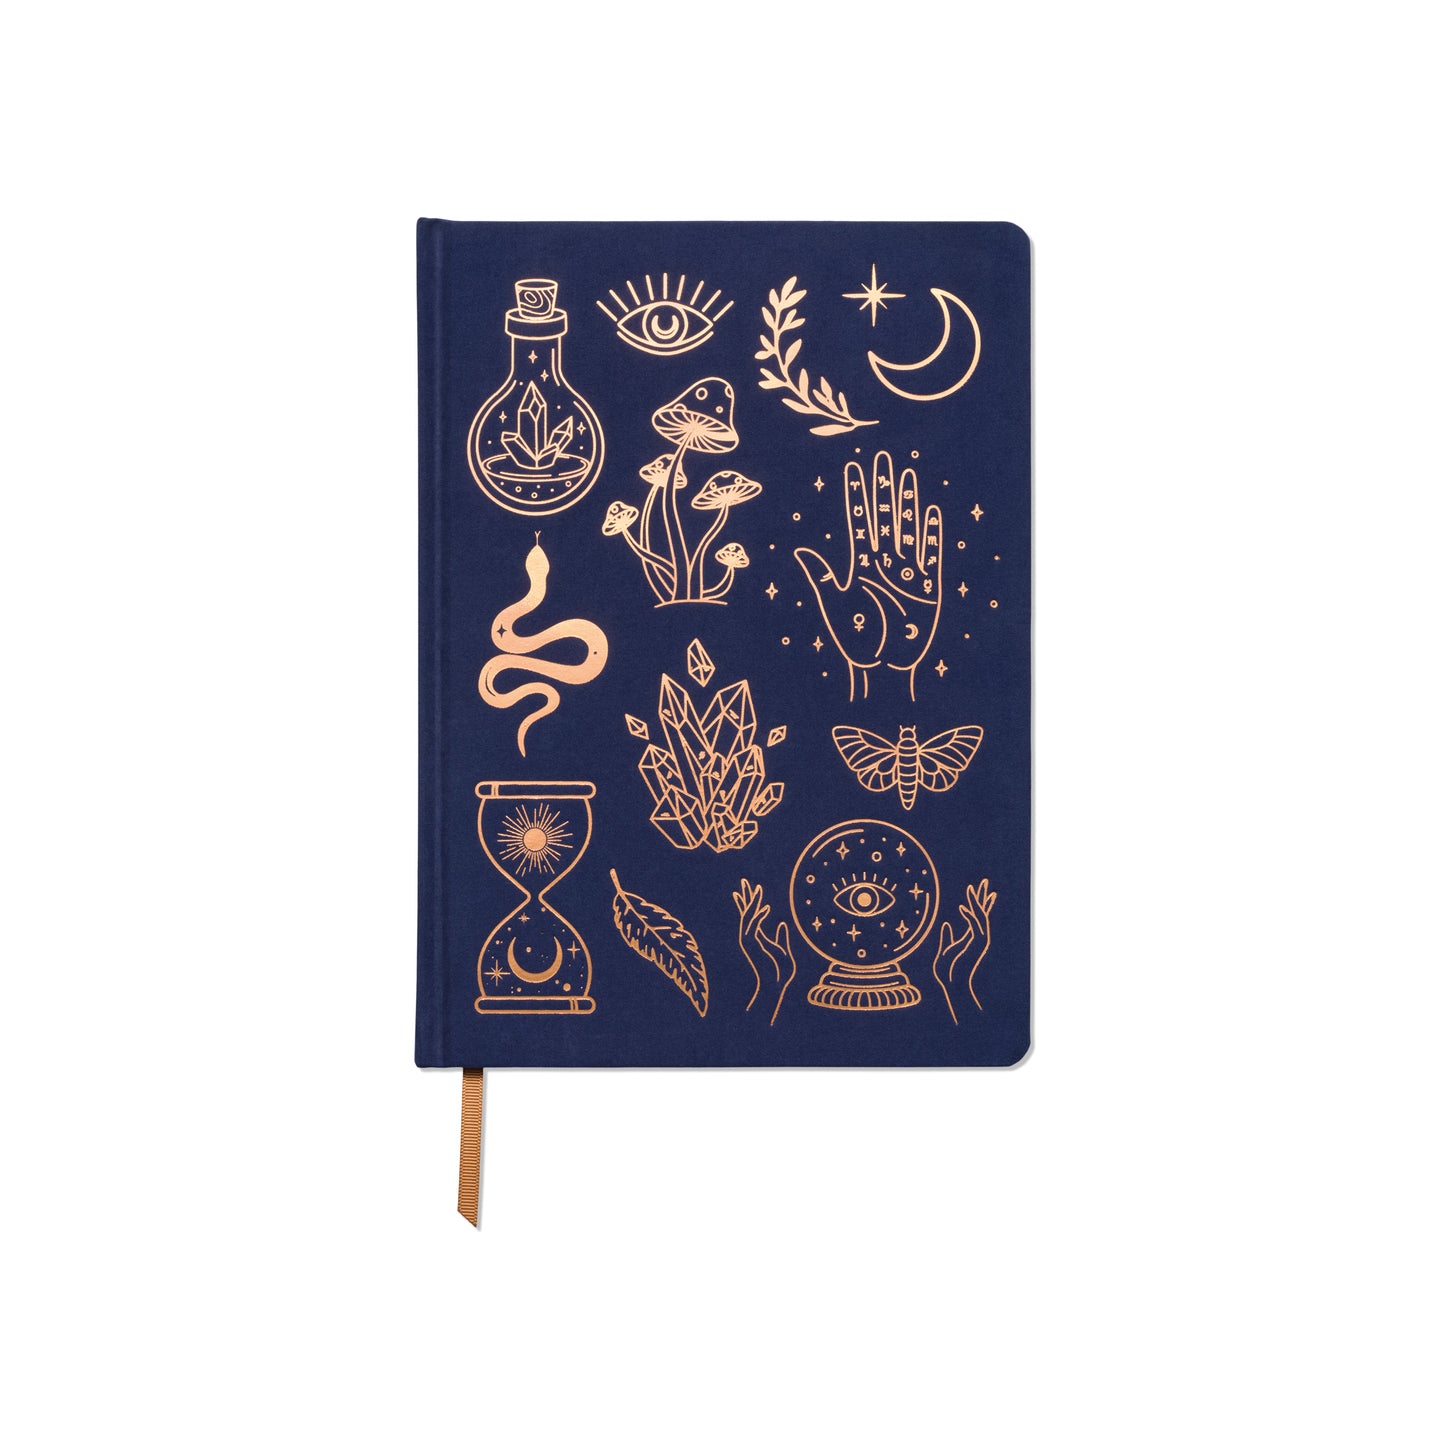 Mystical Icons Jumbo Cloth Covered Journal